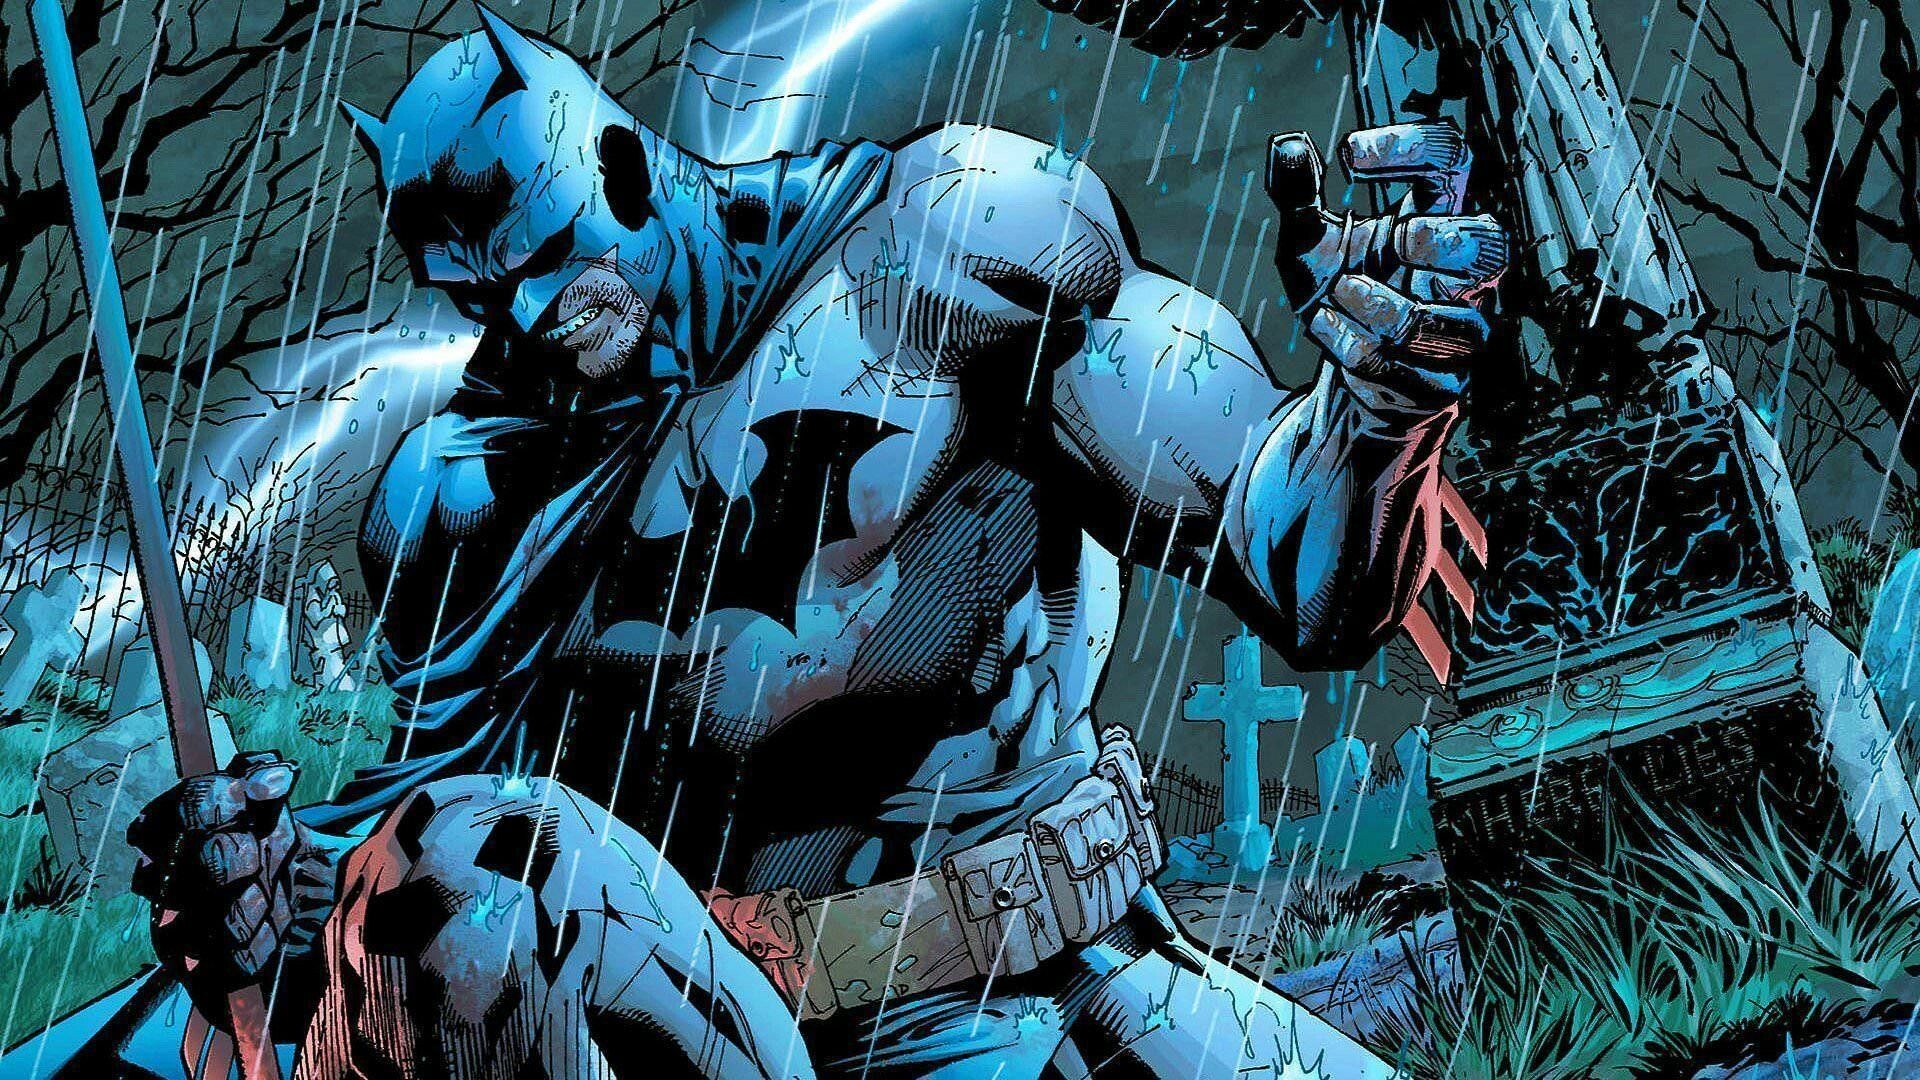 Batman by Jim Lee: Superhero created by Chief Creative Officer of DC. 1920x1080 Full HD Wallpaper.